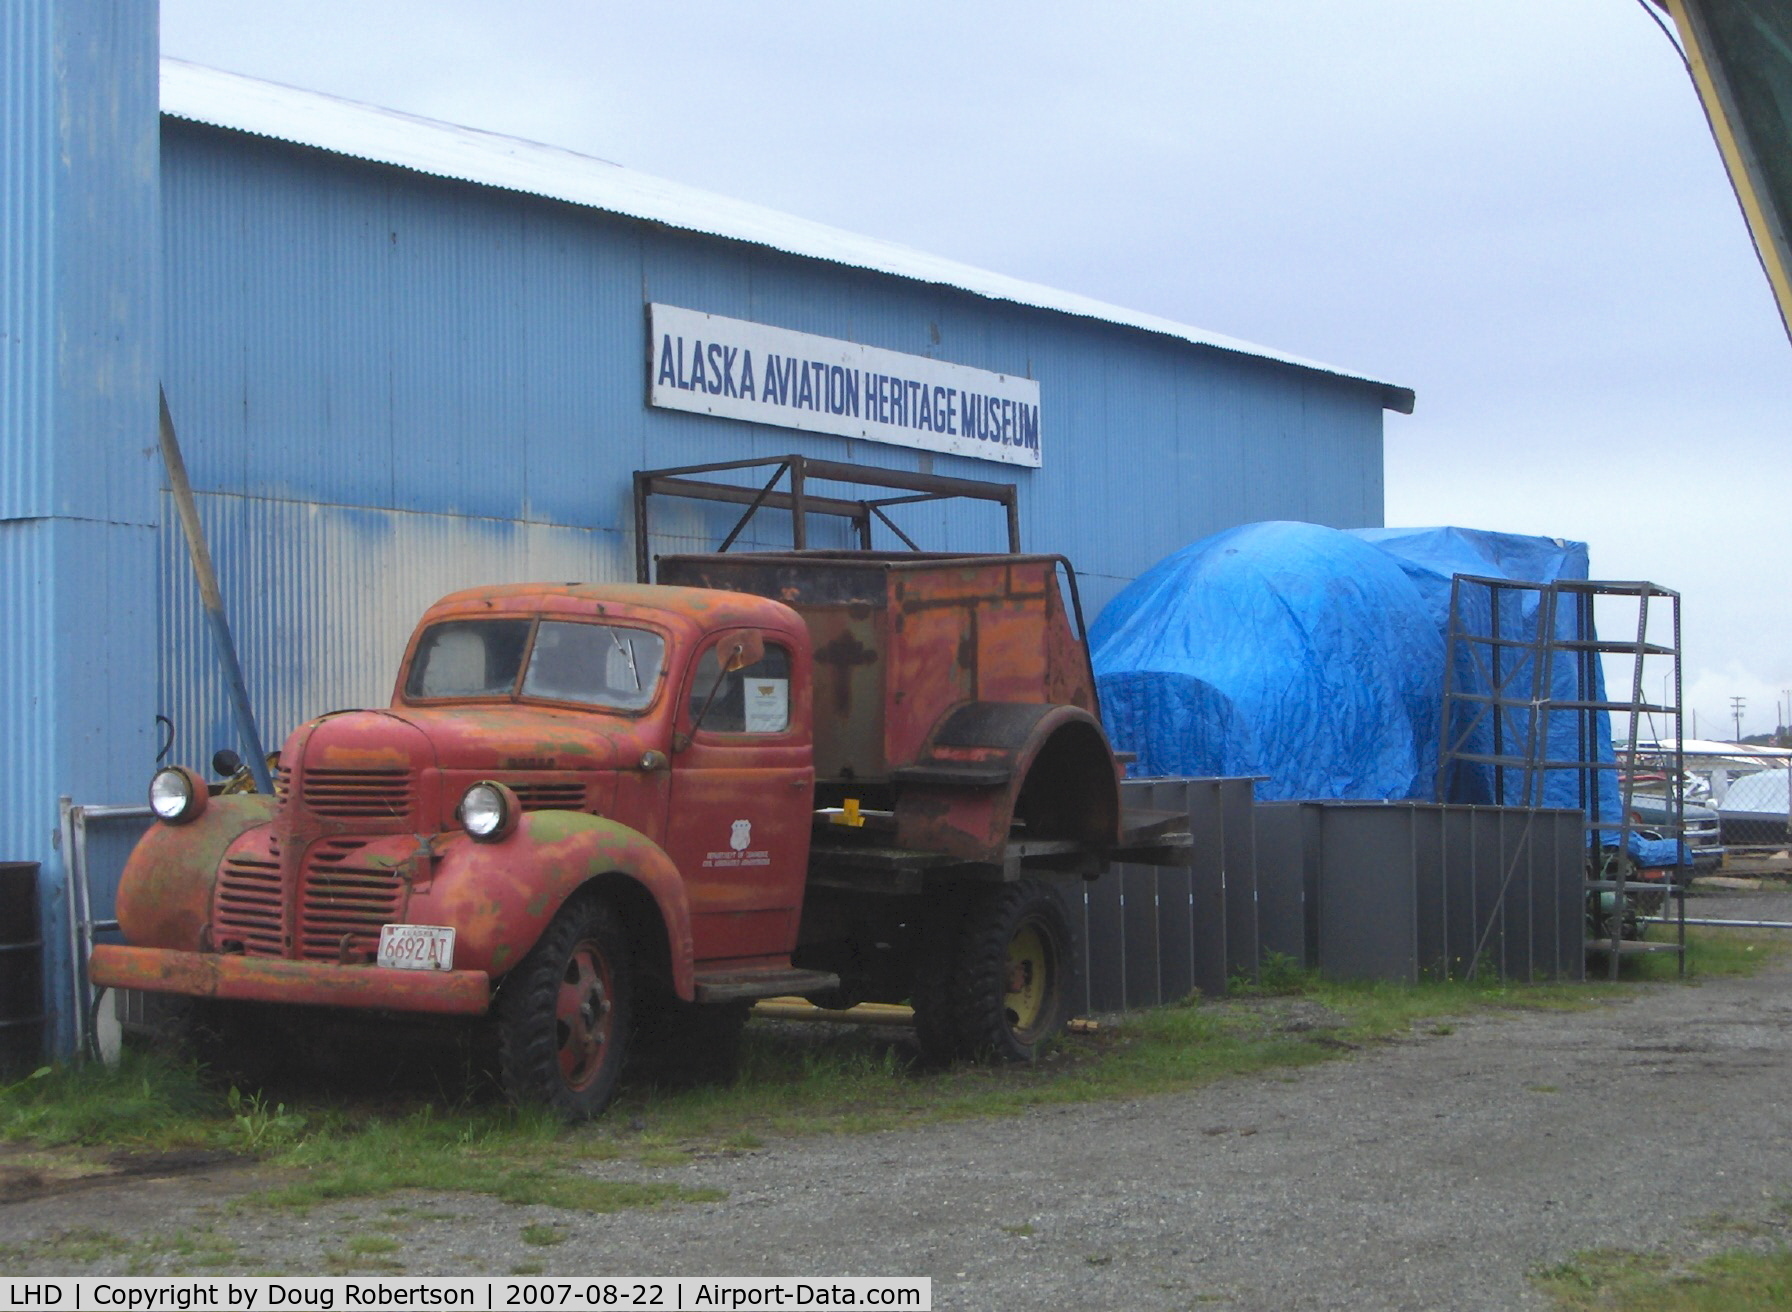 Lake Hood Seaplane Base (LHD) - Alaska Aviation Heritage Museum, fascinating exhibits indoors and out. Don't miss the Restoration Hangar with wonderful, talented volunteer guide workers.